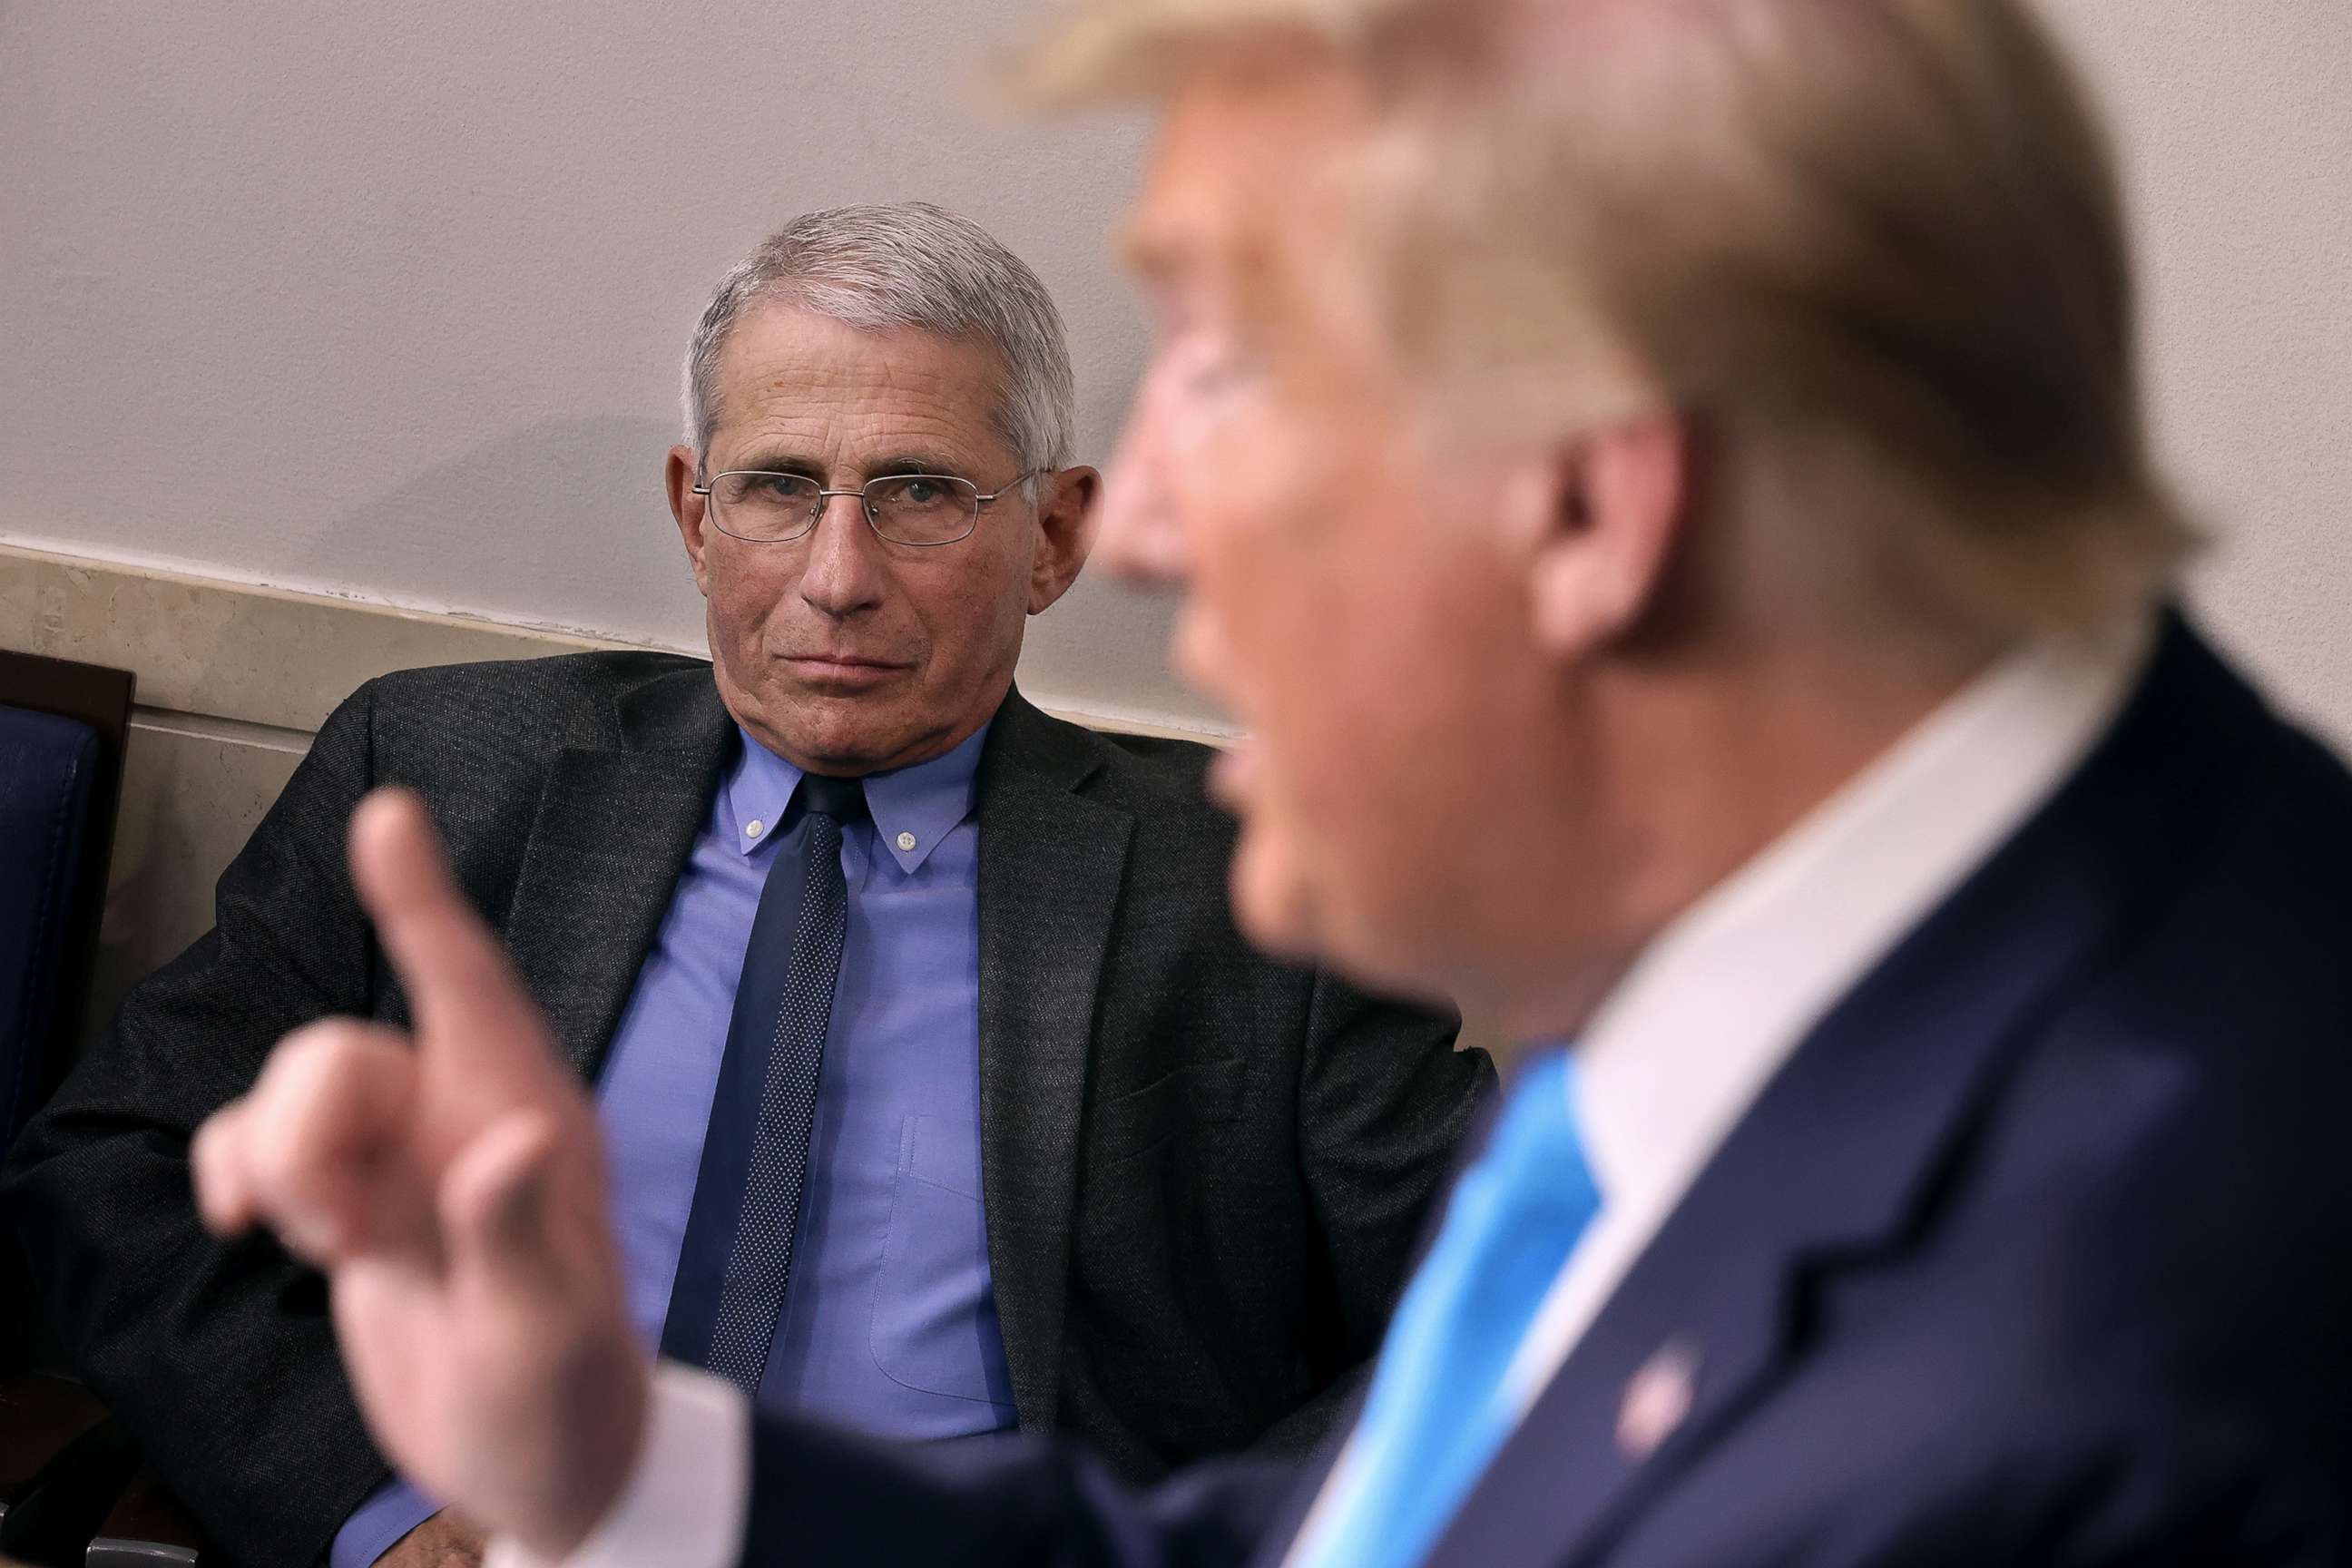 PHOTO: Anthony Fauci, director of the National Institute of Allergy and Infectious Diseases, listens to President Donald Trump speak to reporters in the Brady Press Briefing Room at the White House, April 7, 2020.